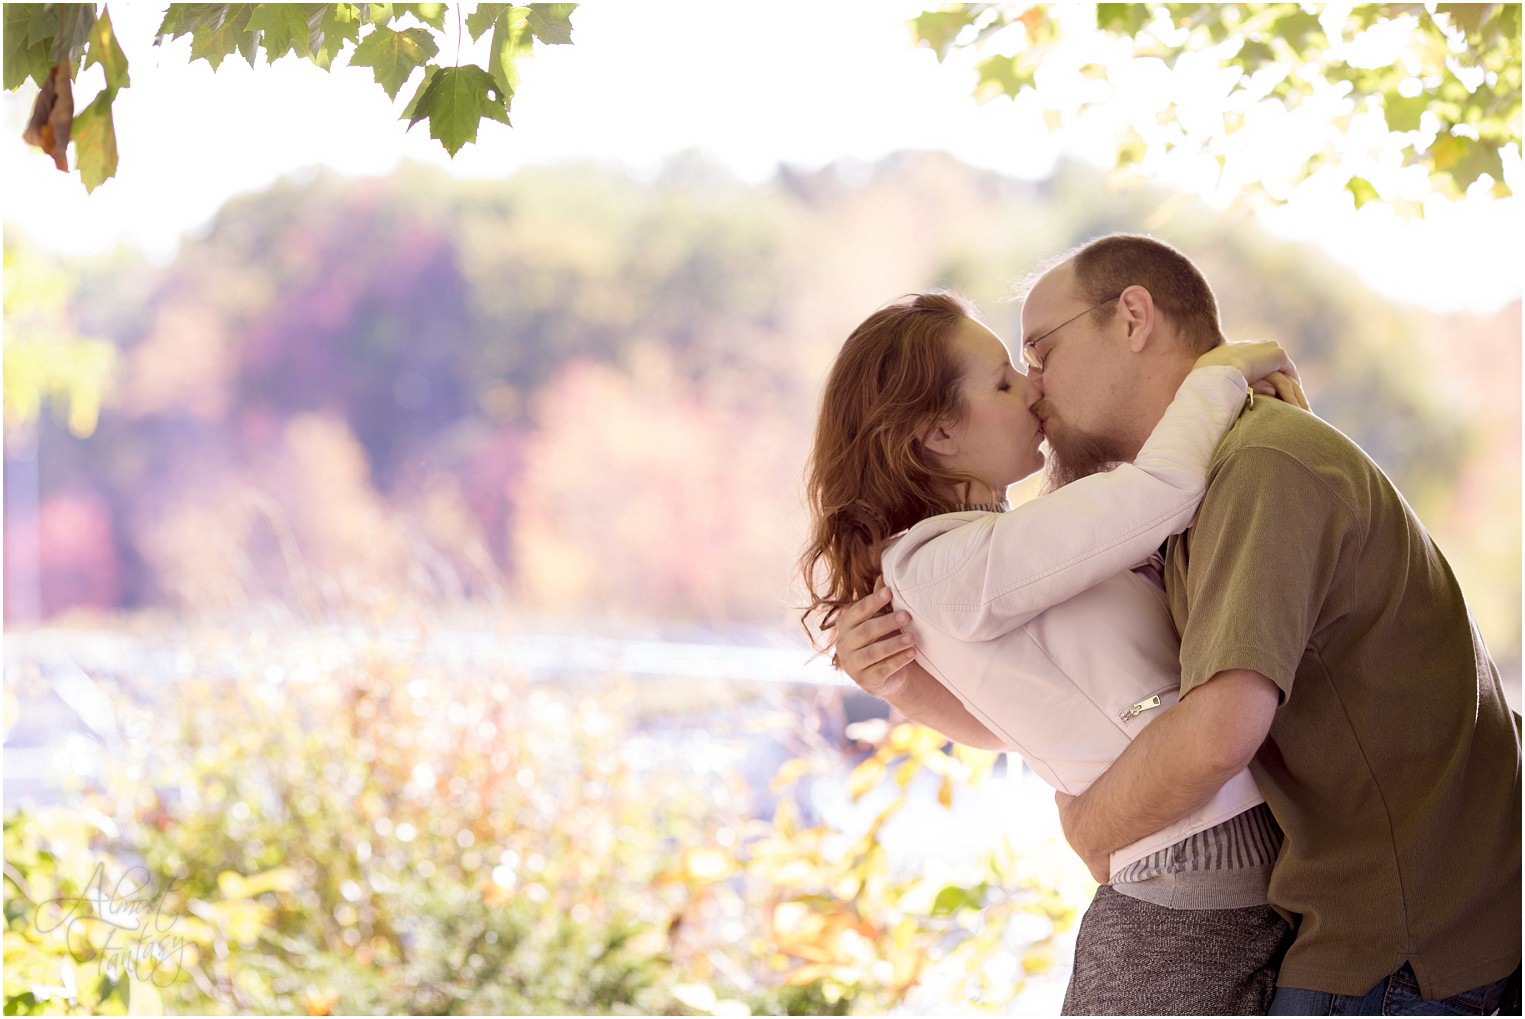 Wall Lake Delton Lakeside Forest Engagement Session Fall - Michigan Photographer Almost Fantasy_0086.jpg